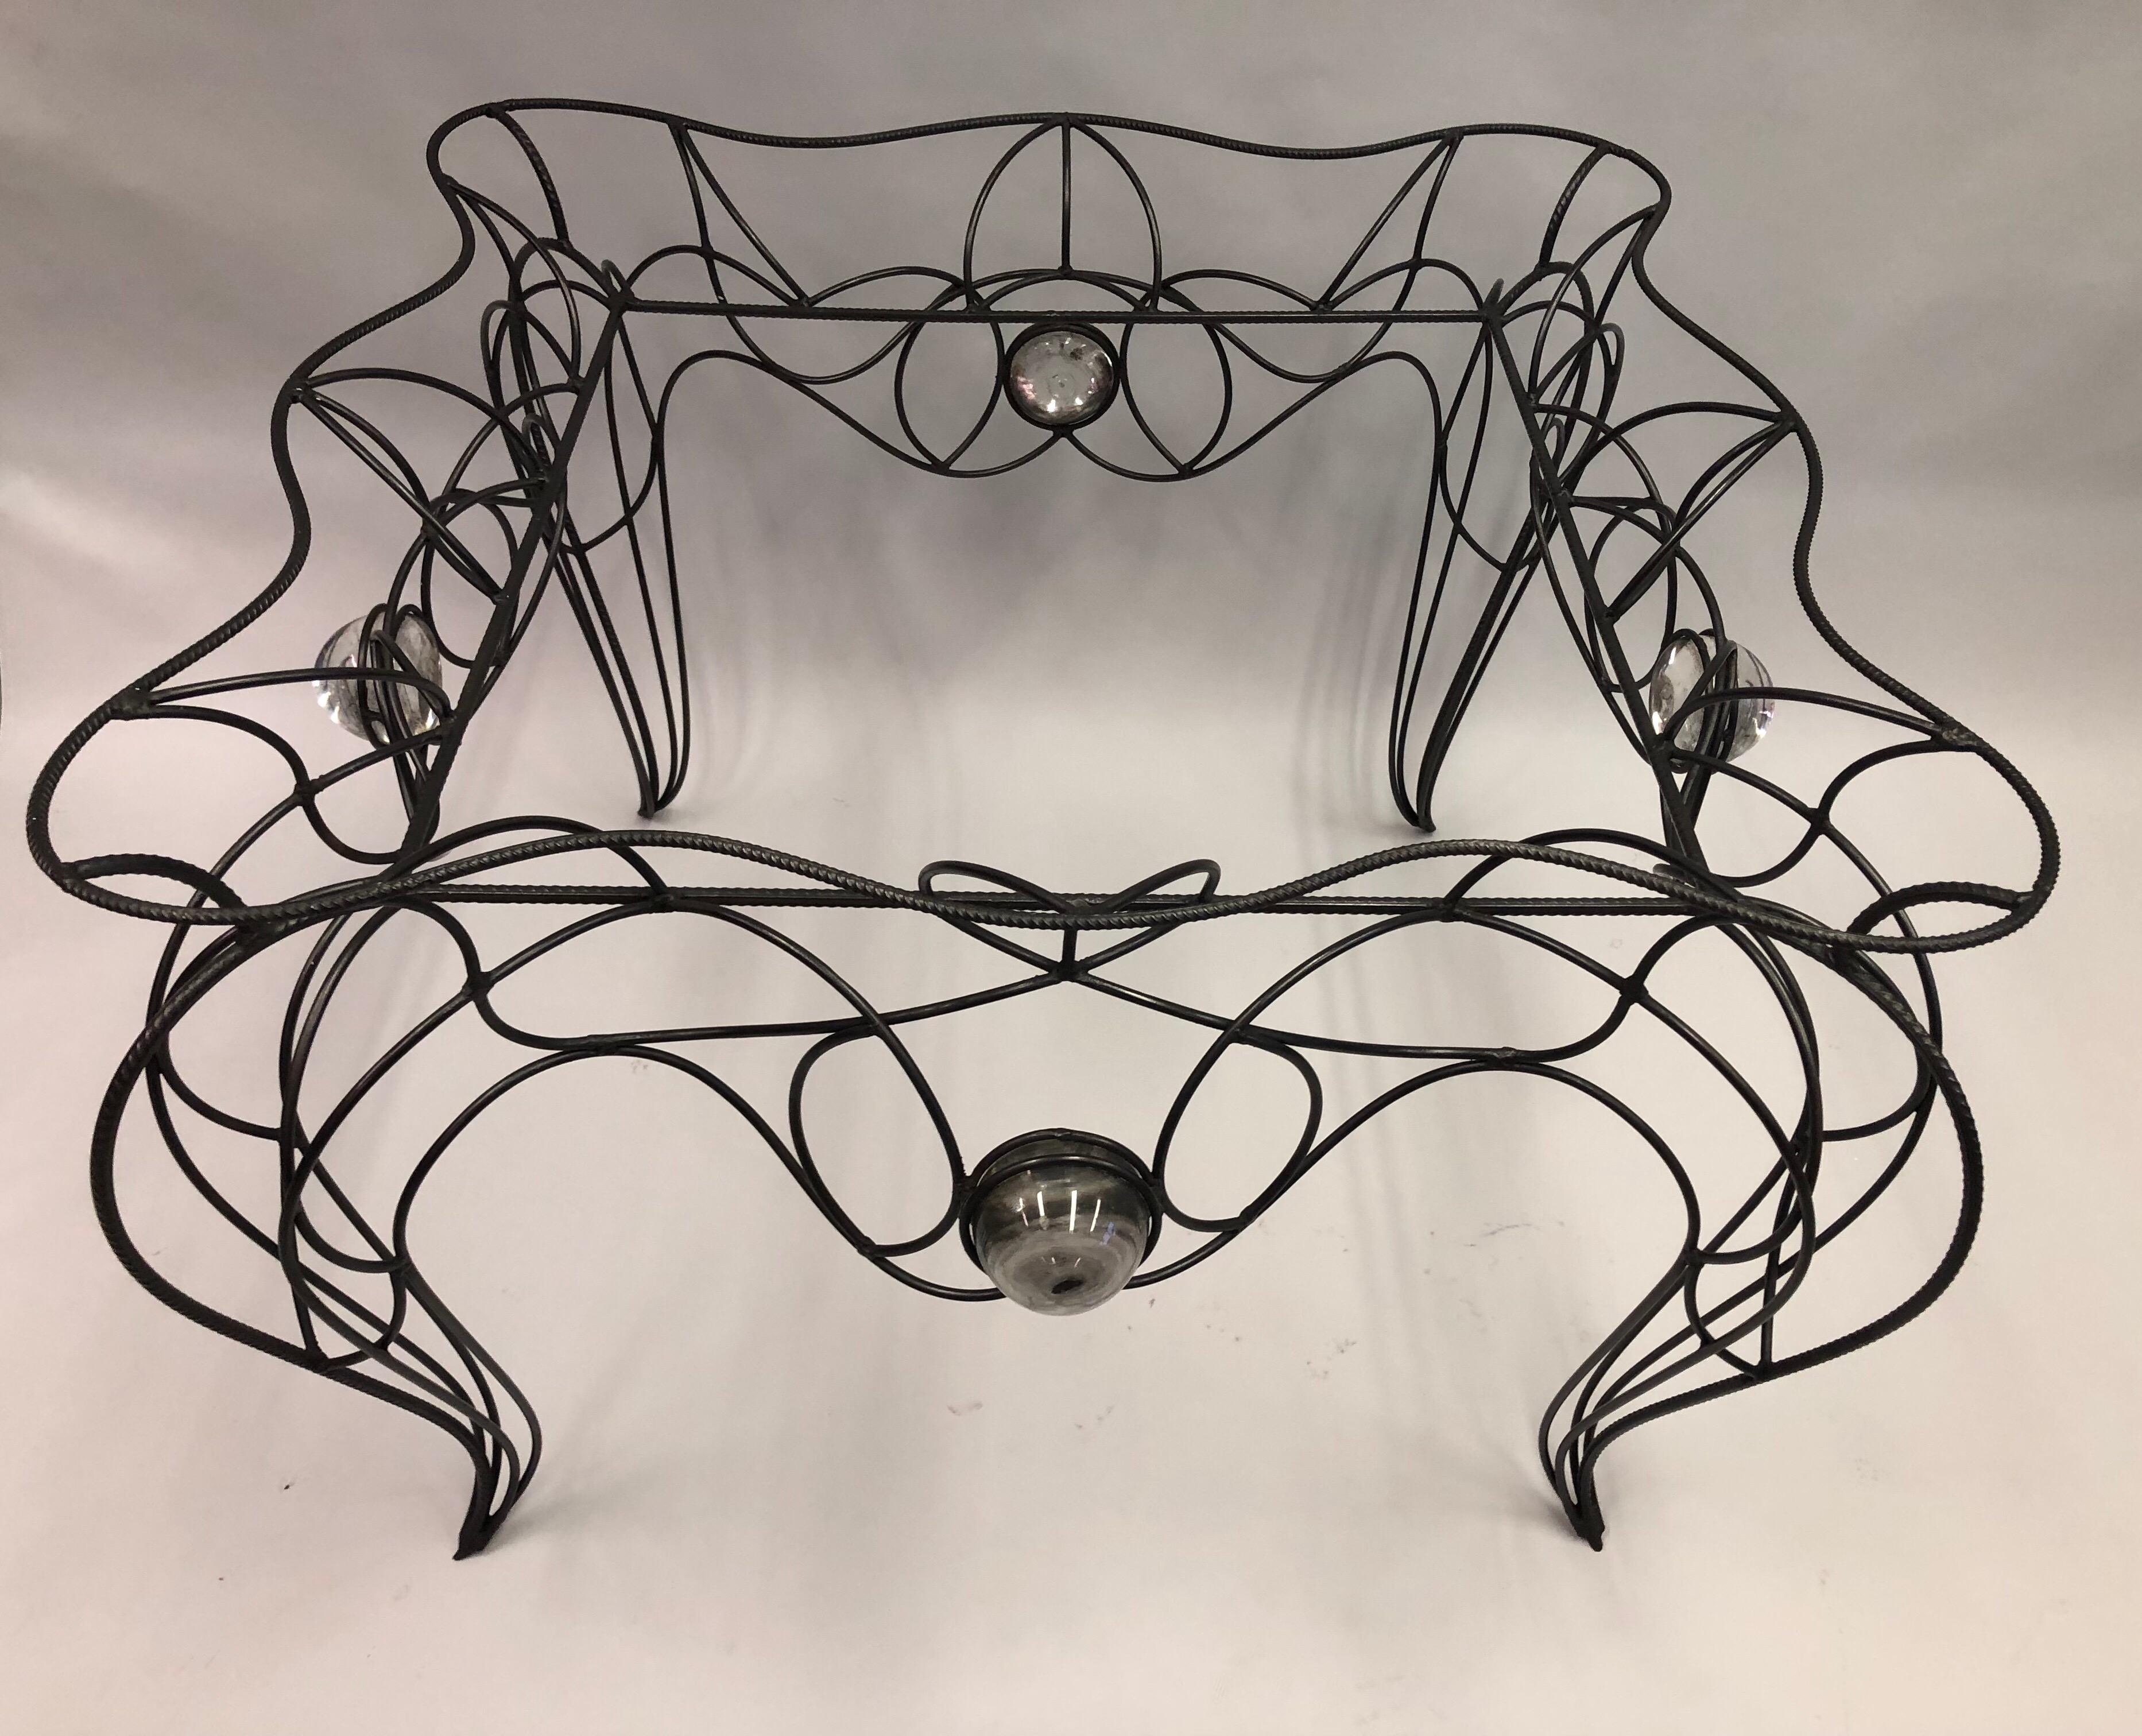 Unique Handwrought Iron & Crystal Center or Dining Table by Andre Dubreuil, 1986 For Sale 1